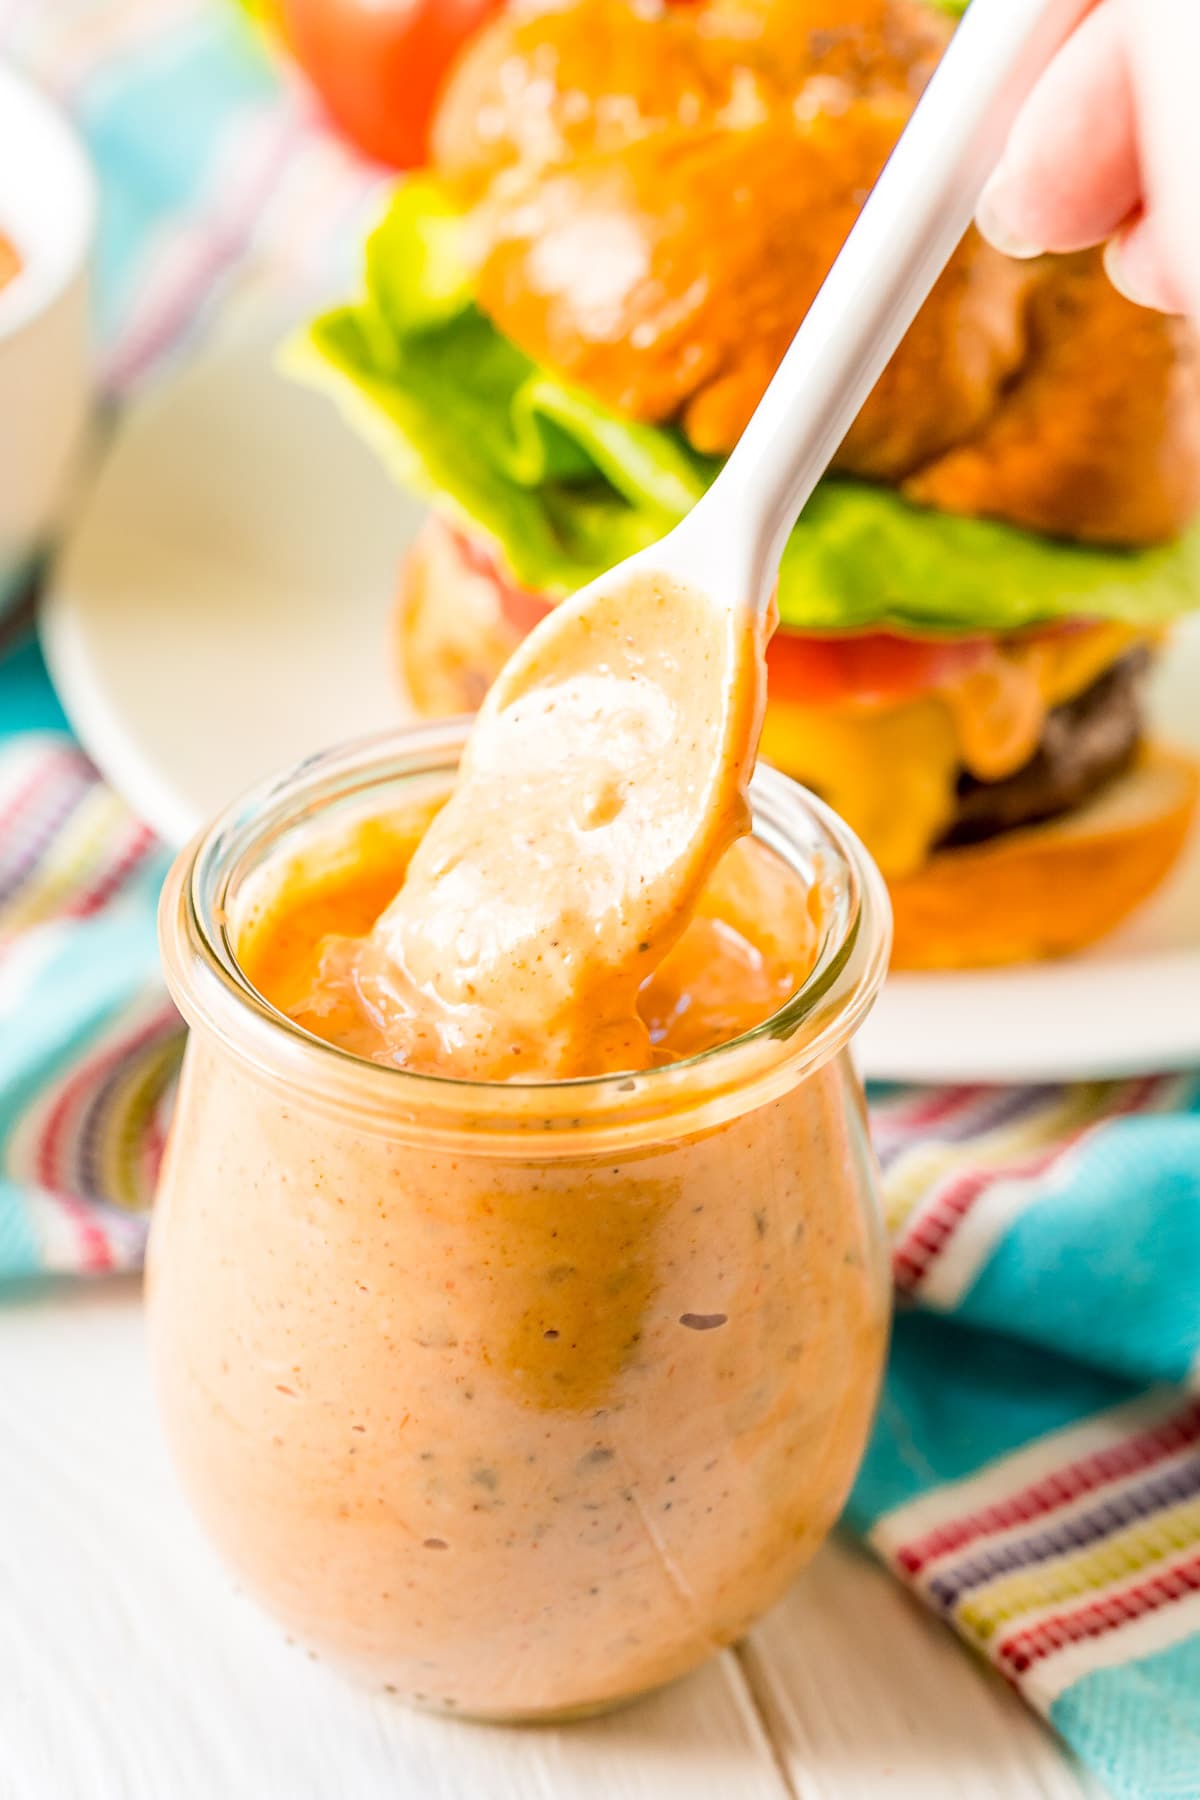 White spoon scooping burger sauce out of a small glass jar. Burger and blue striped napkin in the background.